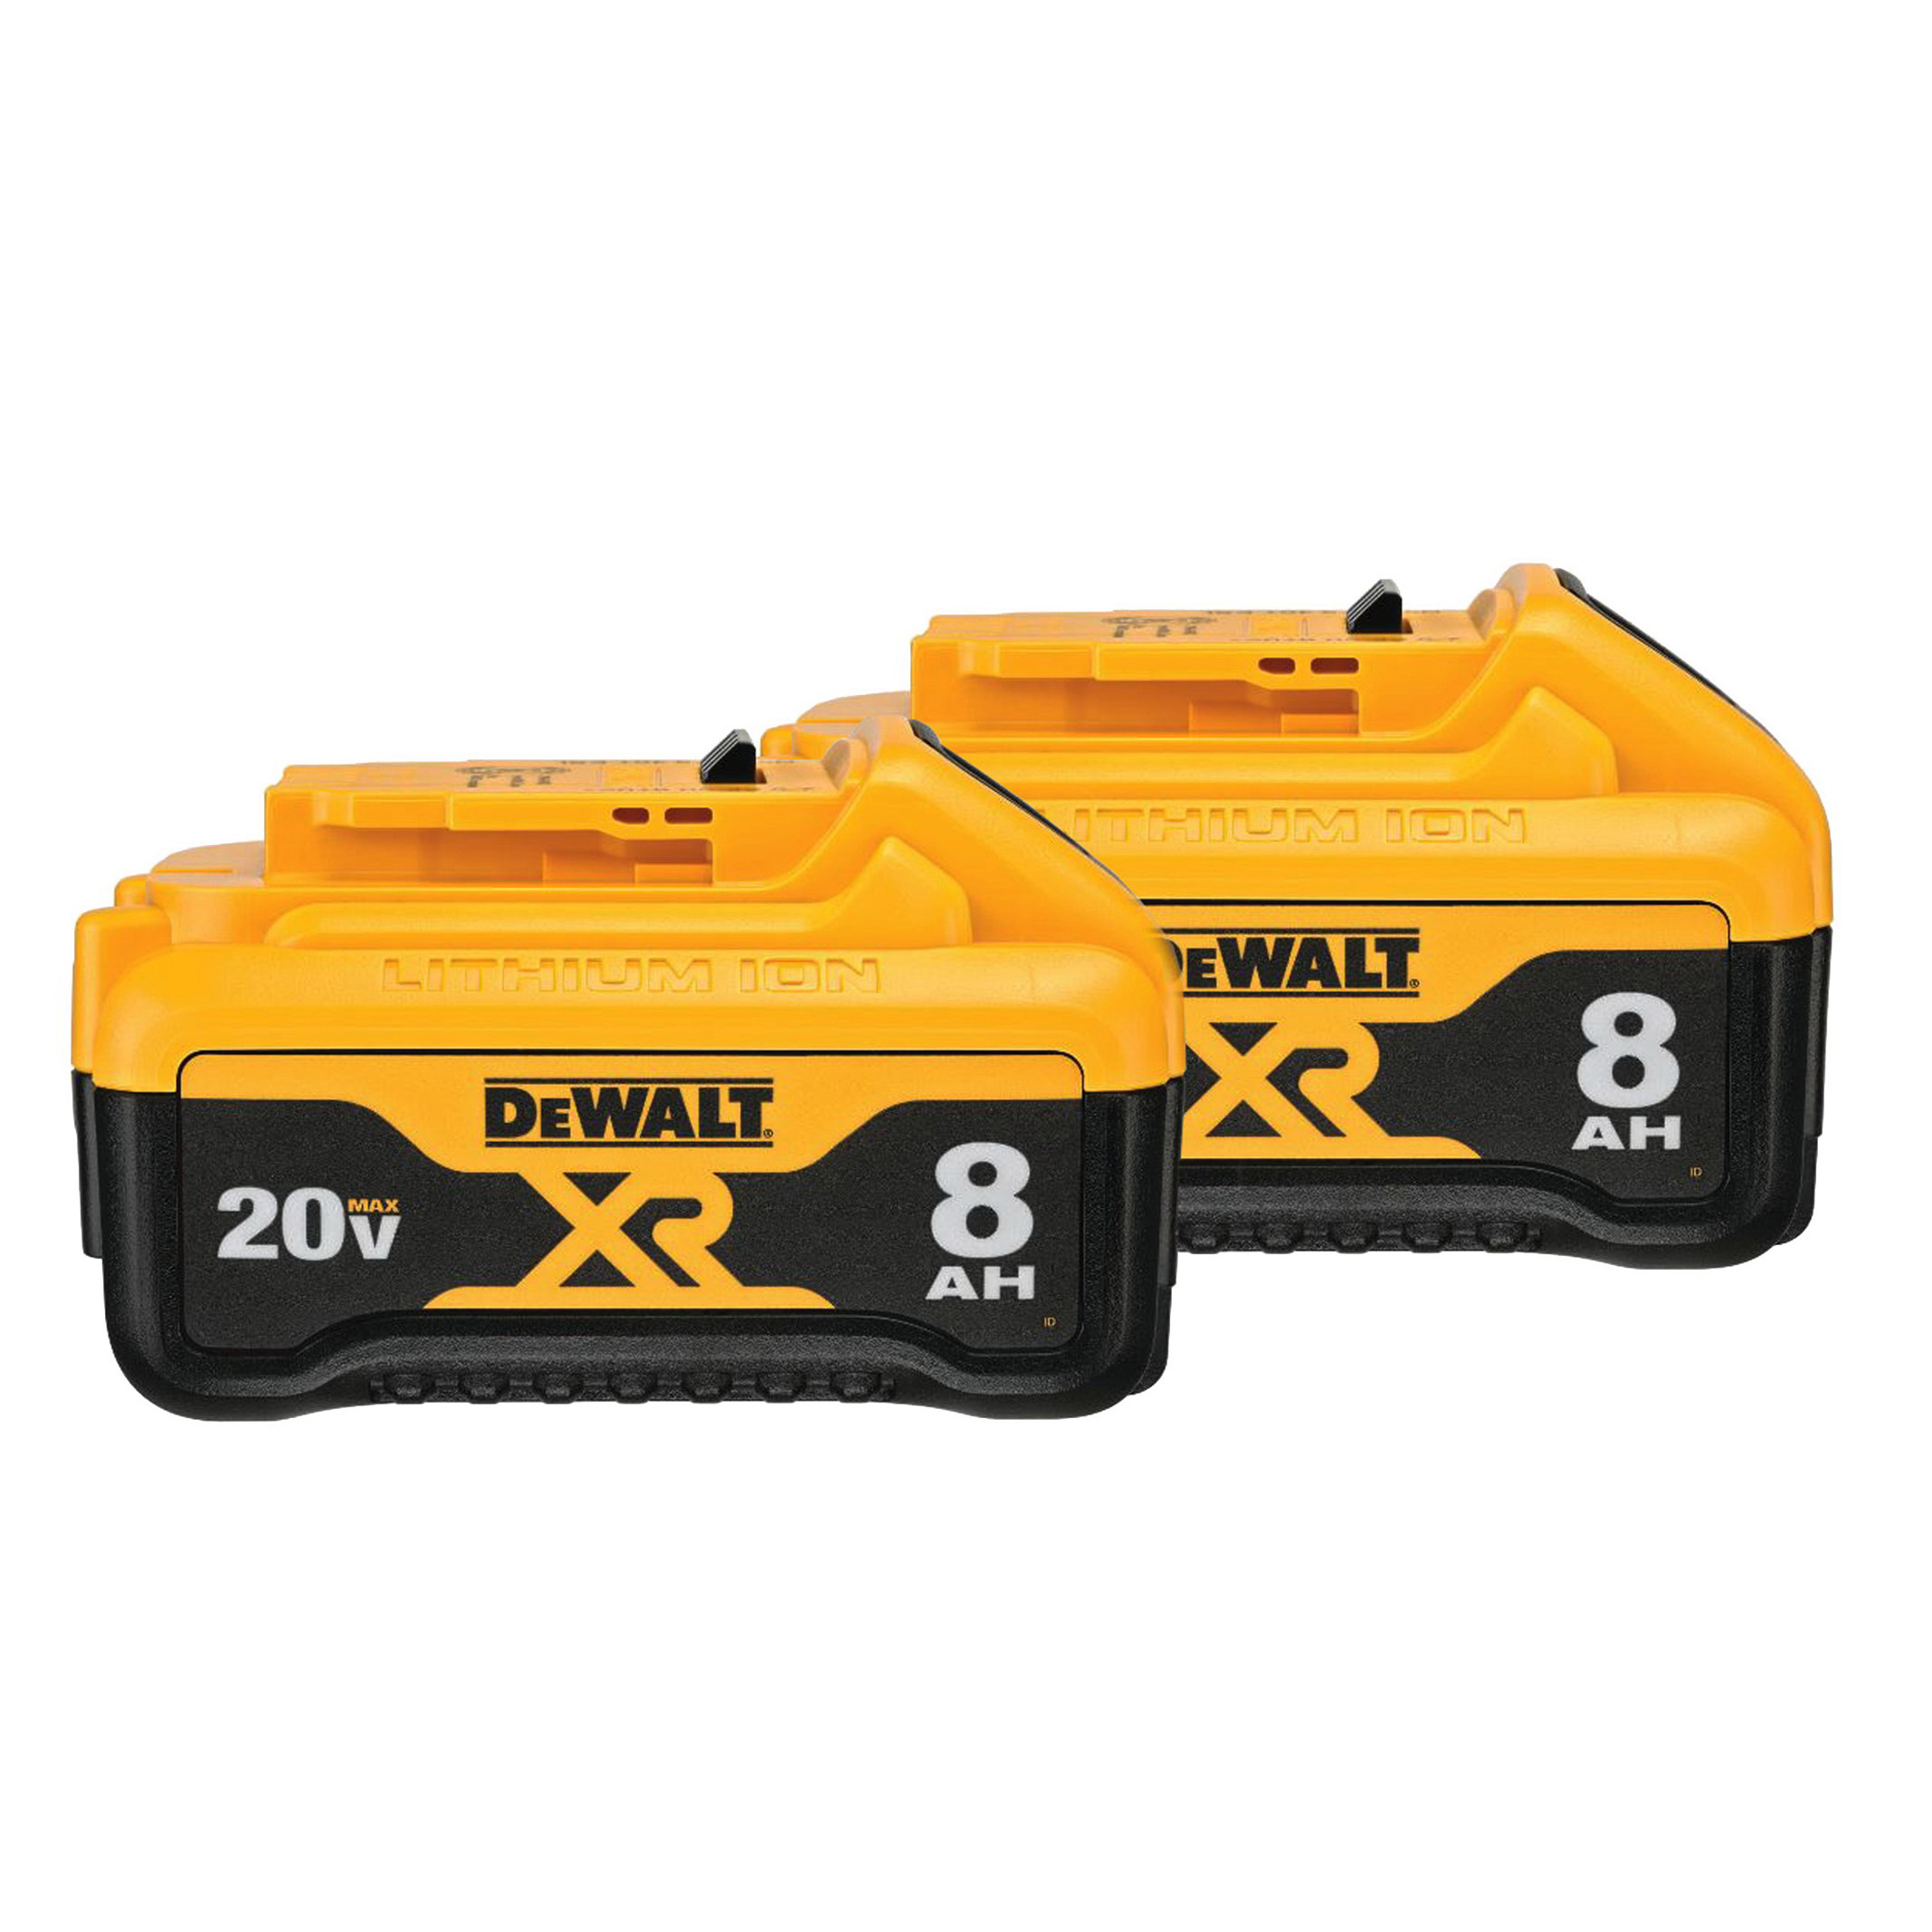 DCB208-2 Battery, 20 V Battery, 8 Ah, Includes: (2) DCB208 20 V MAX Lithium-Ion Batteries